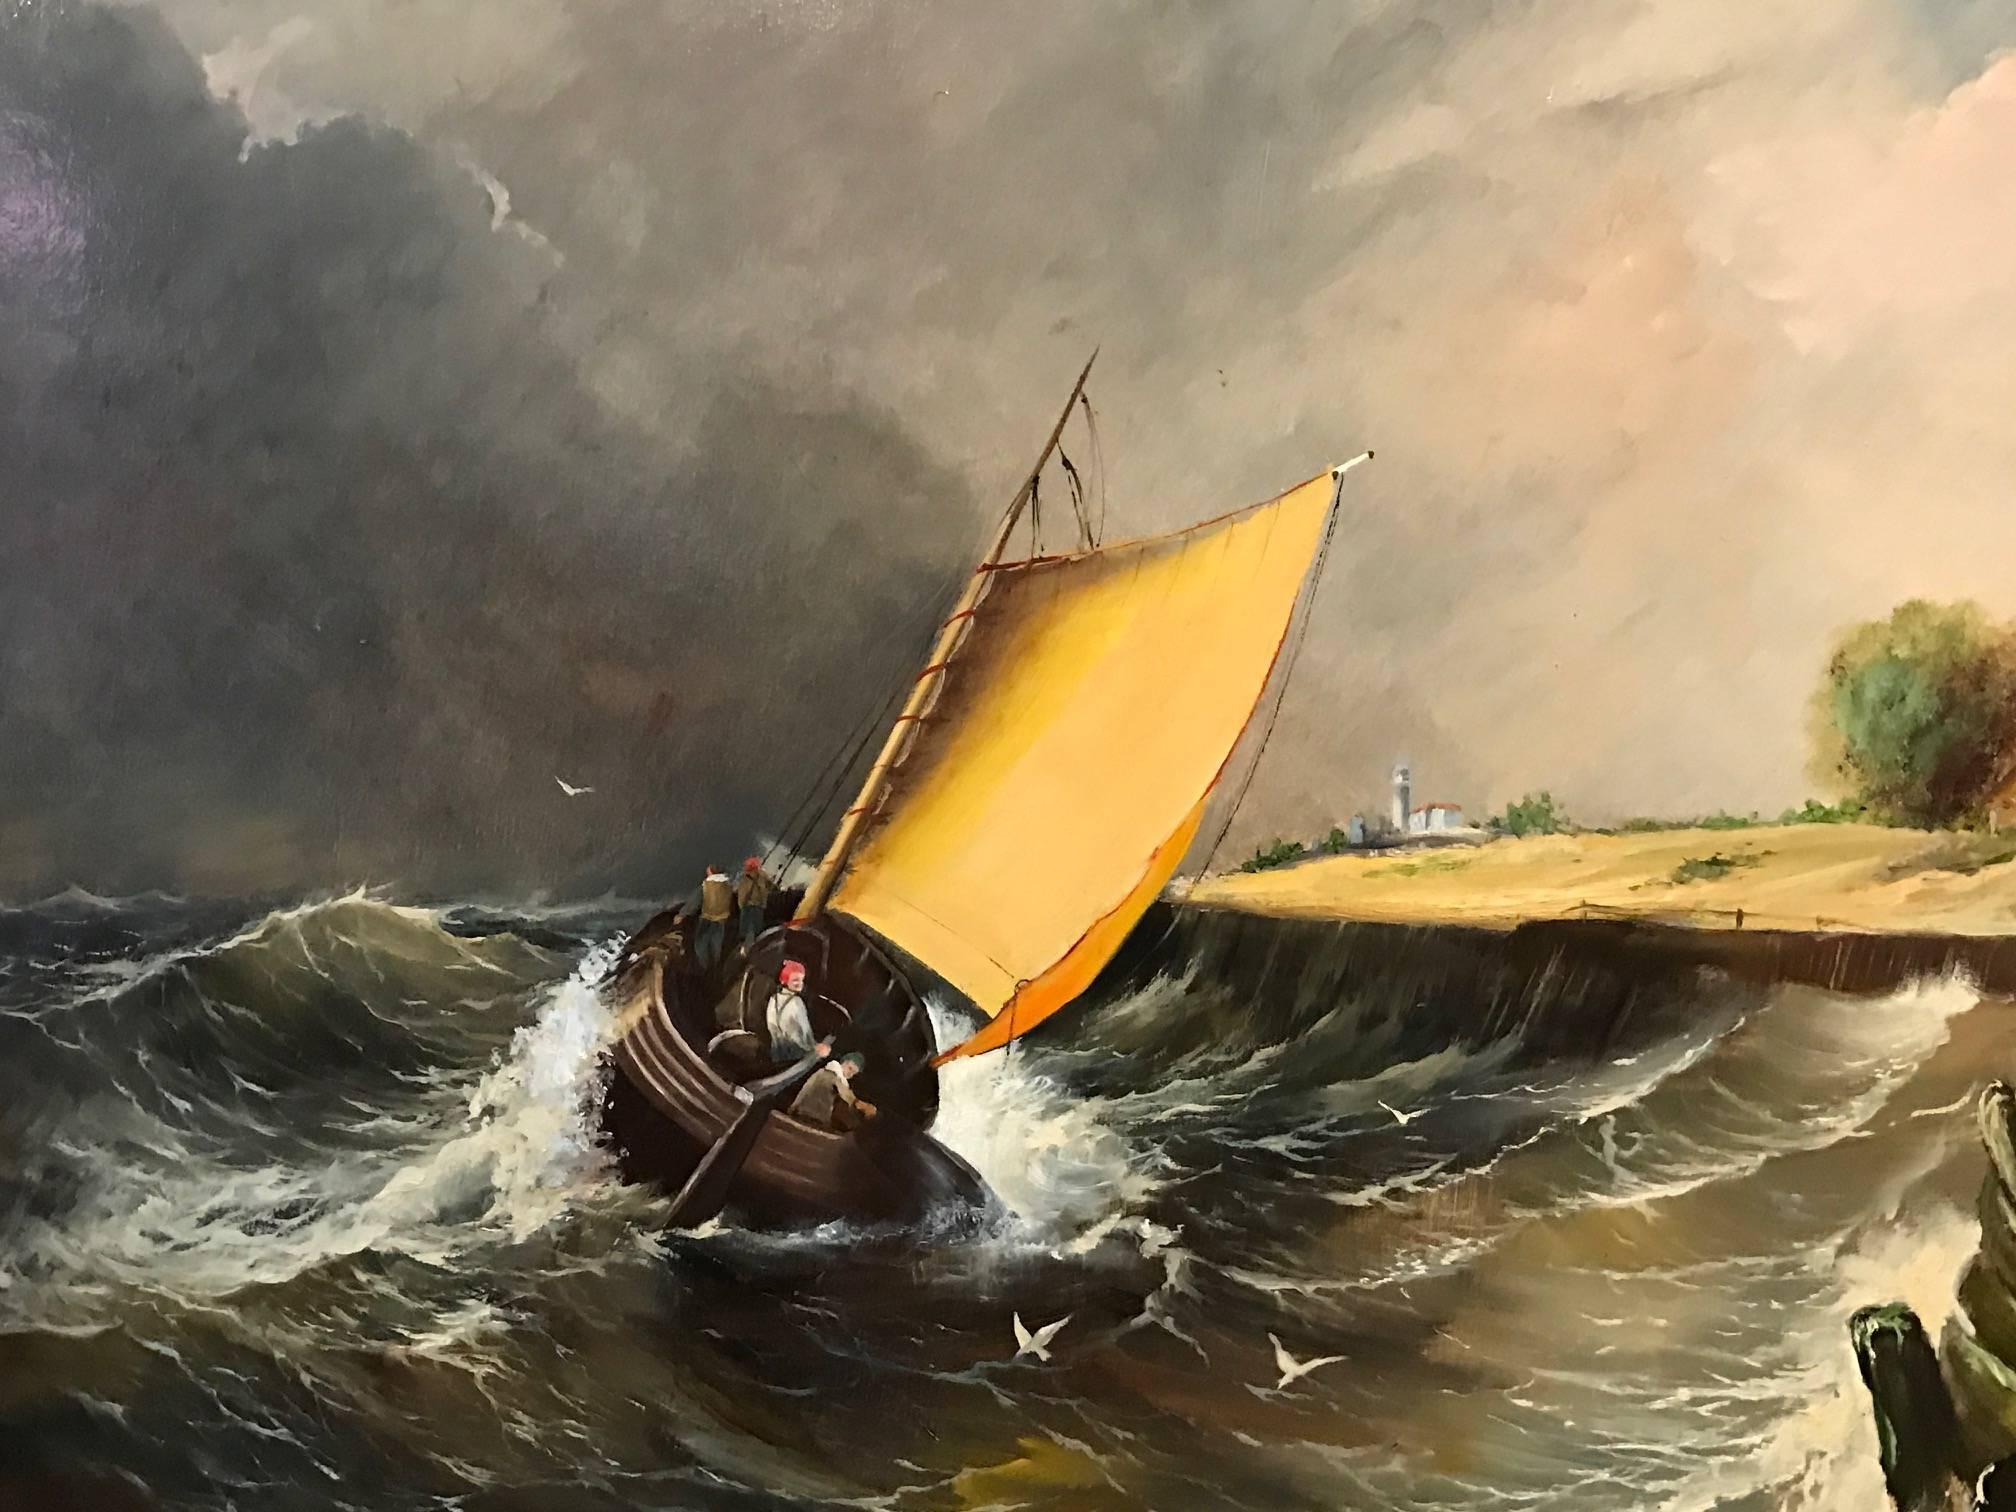 Fine British Maritime Oil Painting - Fishing Boat on Rough Seas - Signed - Brown Landscape Painting by Robert Dumont-Smith